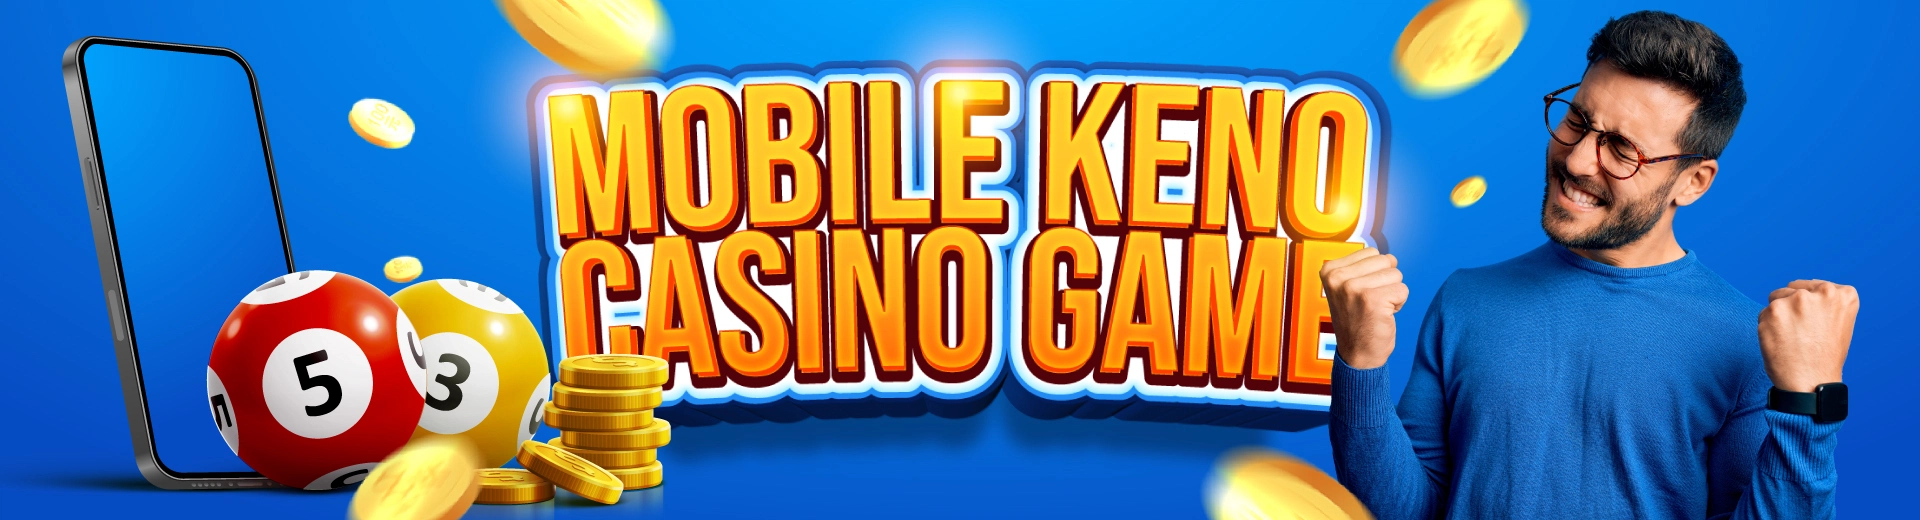 Mobile Keno Casino Game in the Philippines